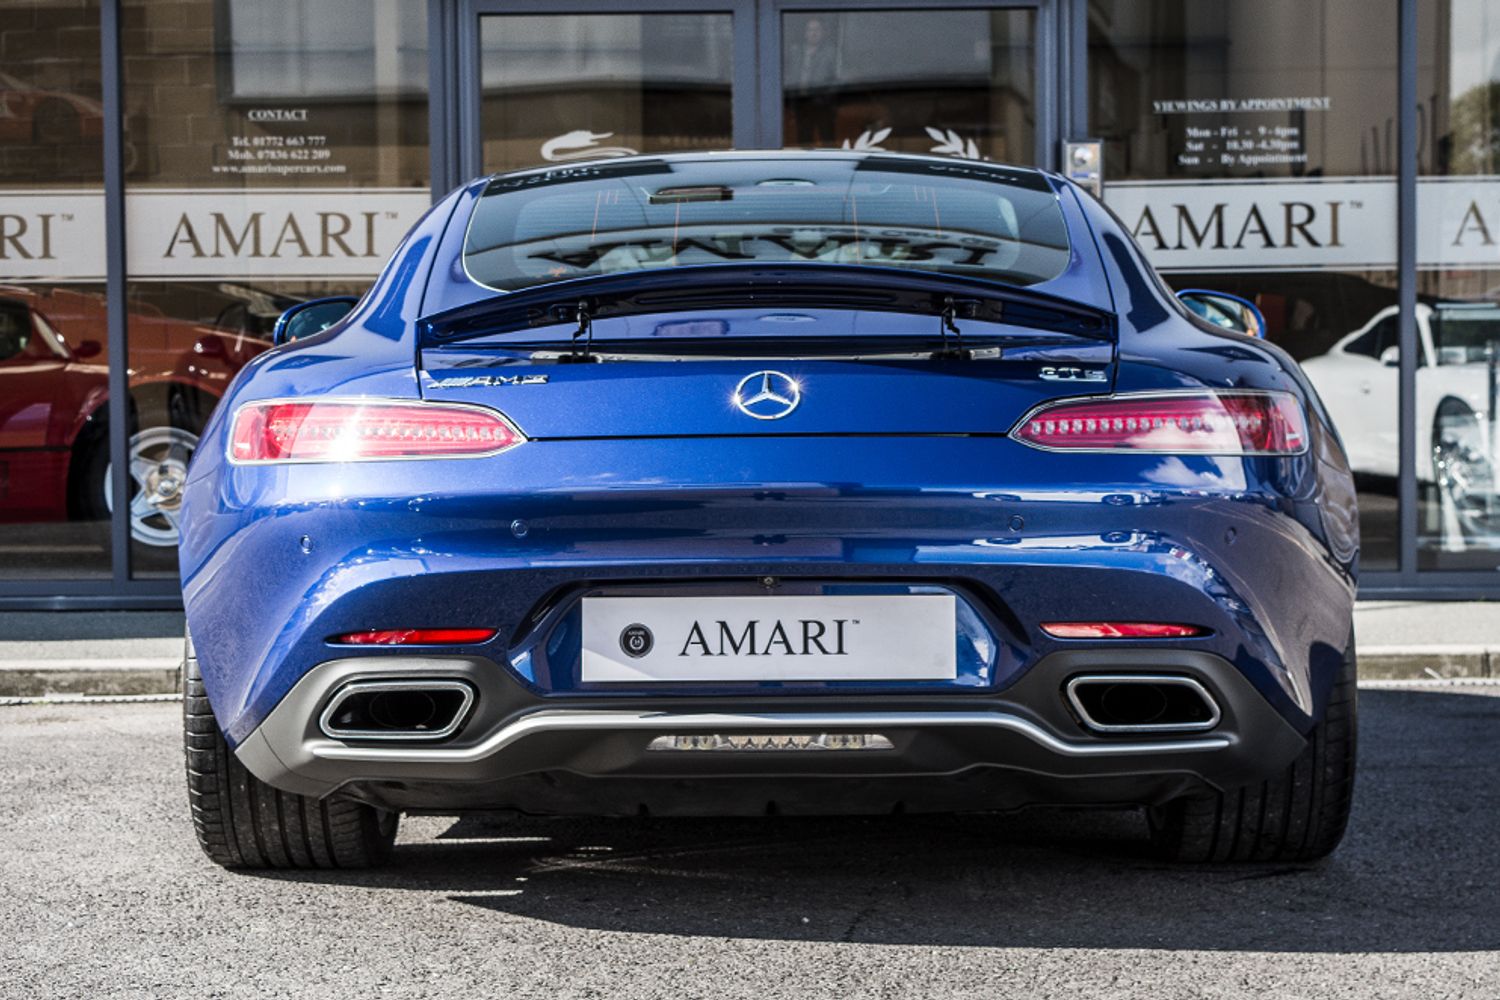 MERCEDES-BENZ GT COUPE 4.0 AMG GT S